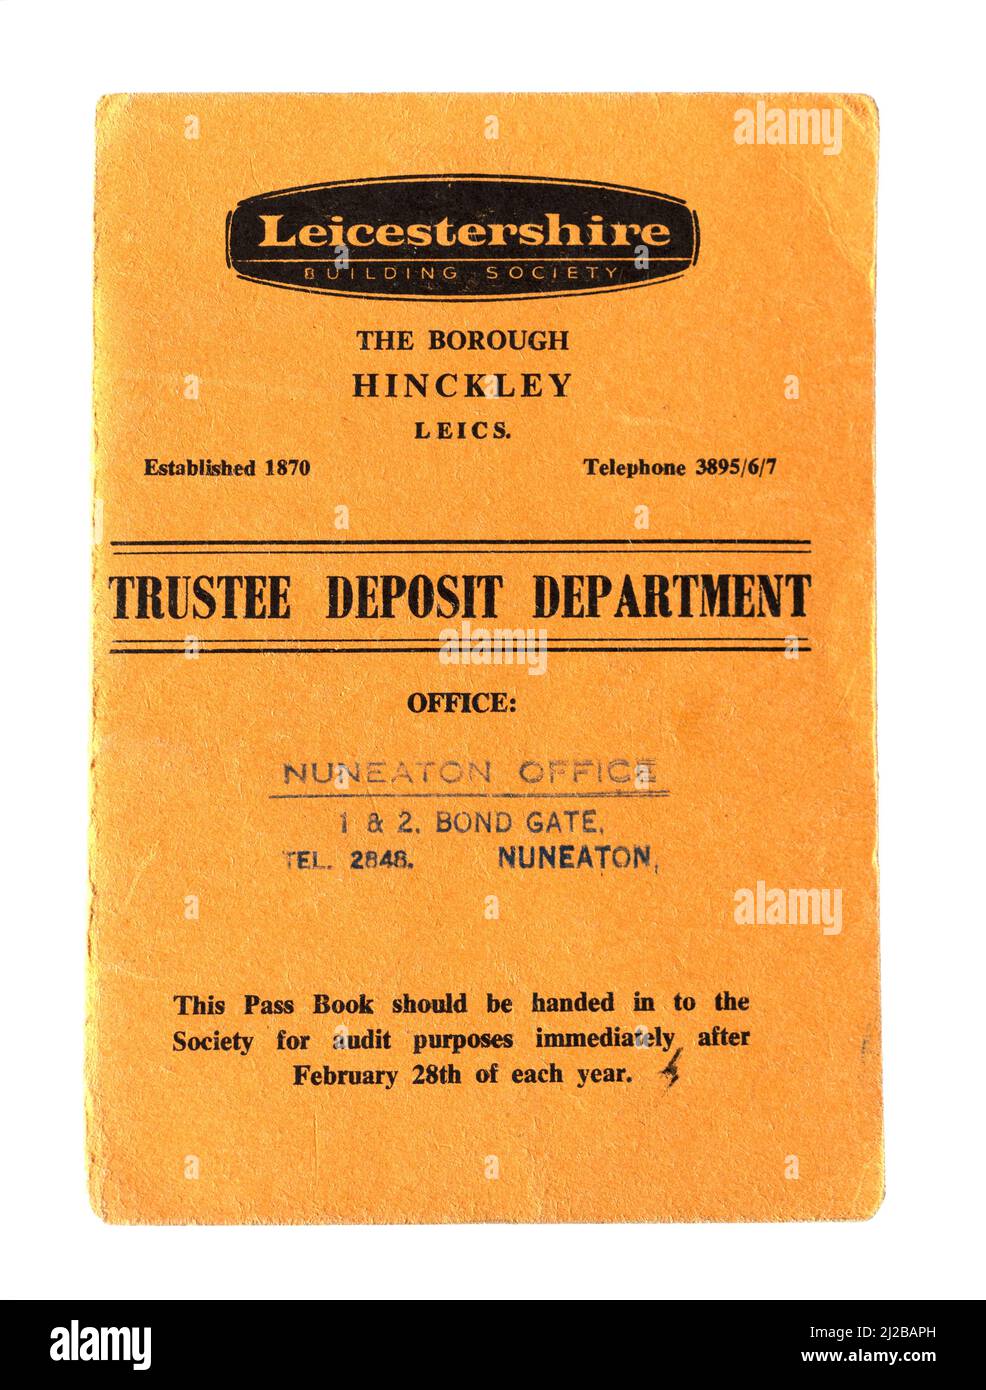 The cover of a savings pass book for an account opened with the Leicestershire Building Society in 1962. Stock Photo